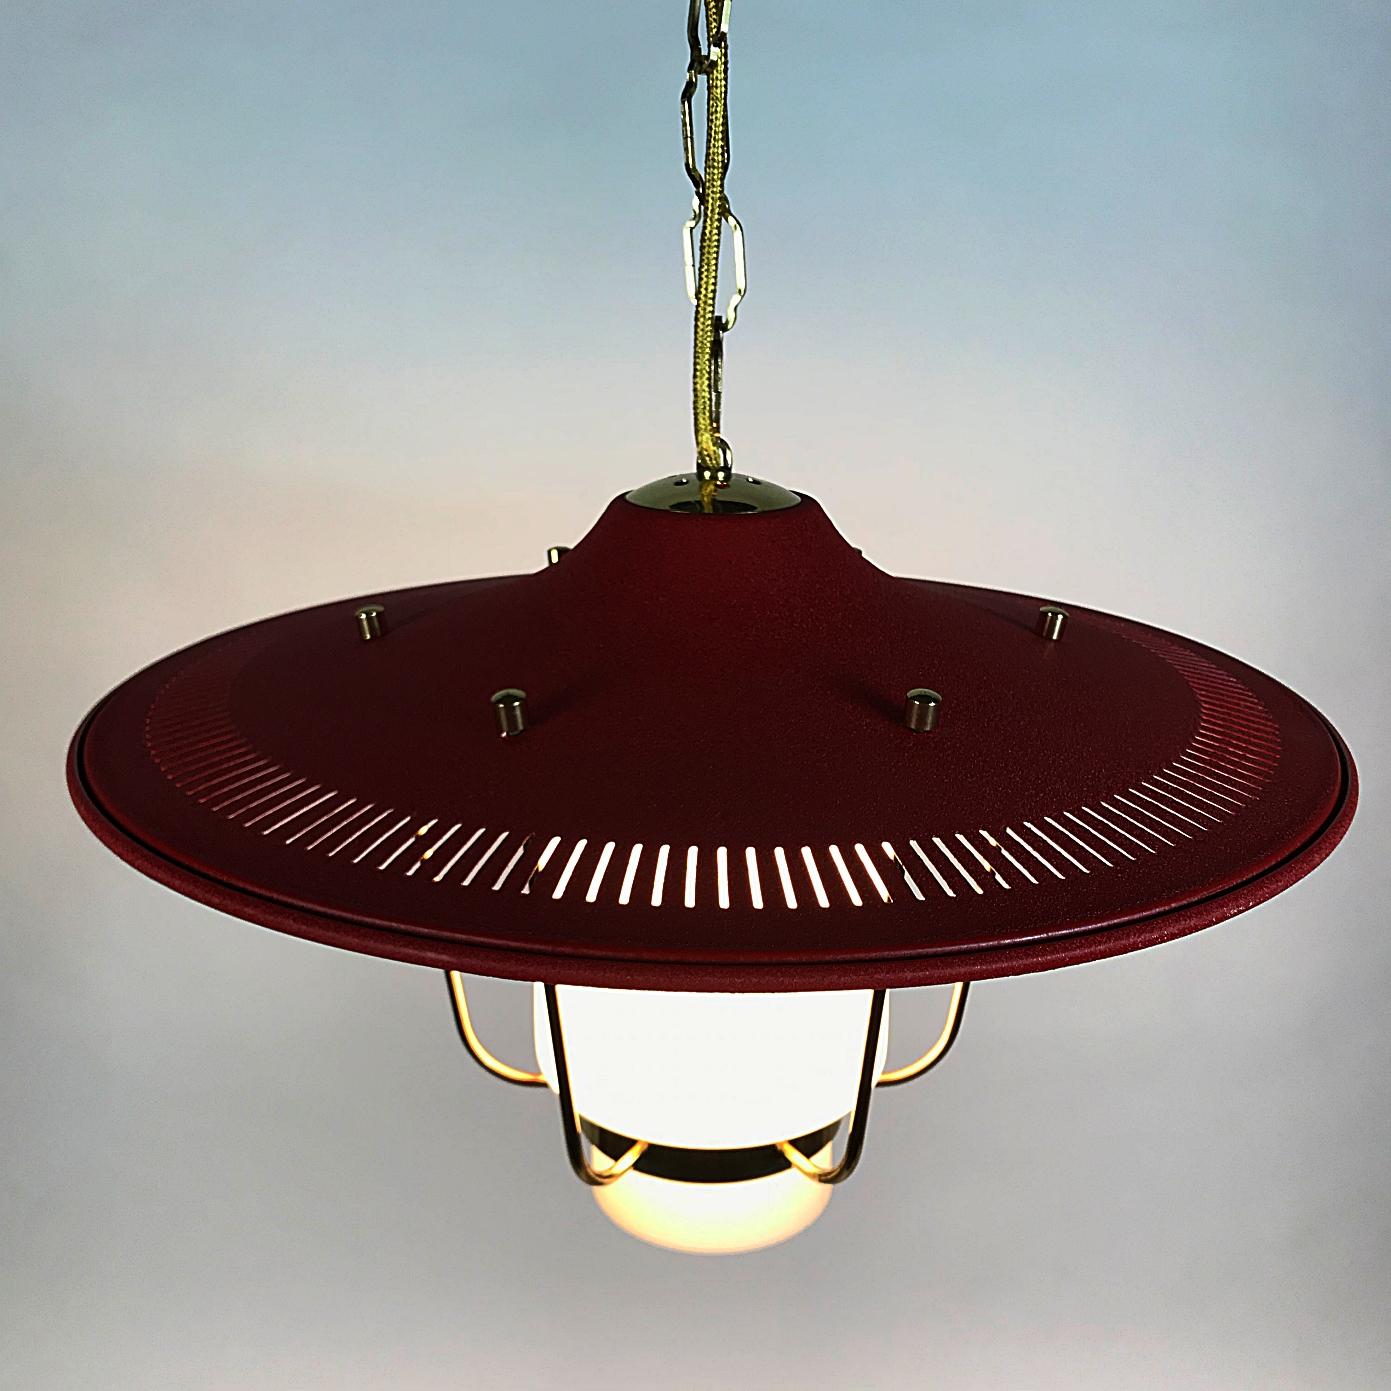 Opal Midcentury Stilnovo Lantern Brass & Red Lacquered Shade, 1950s, Italy For Sale